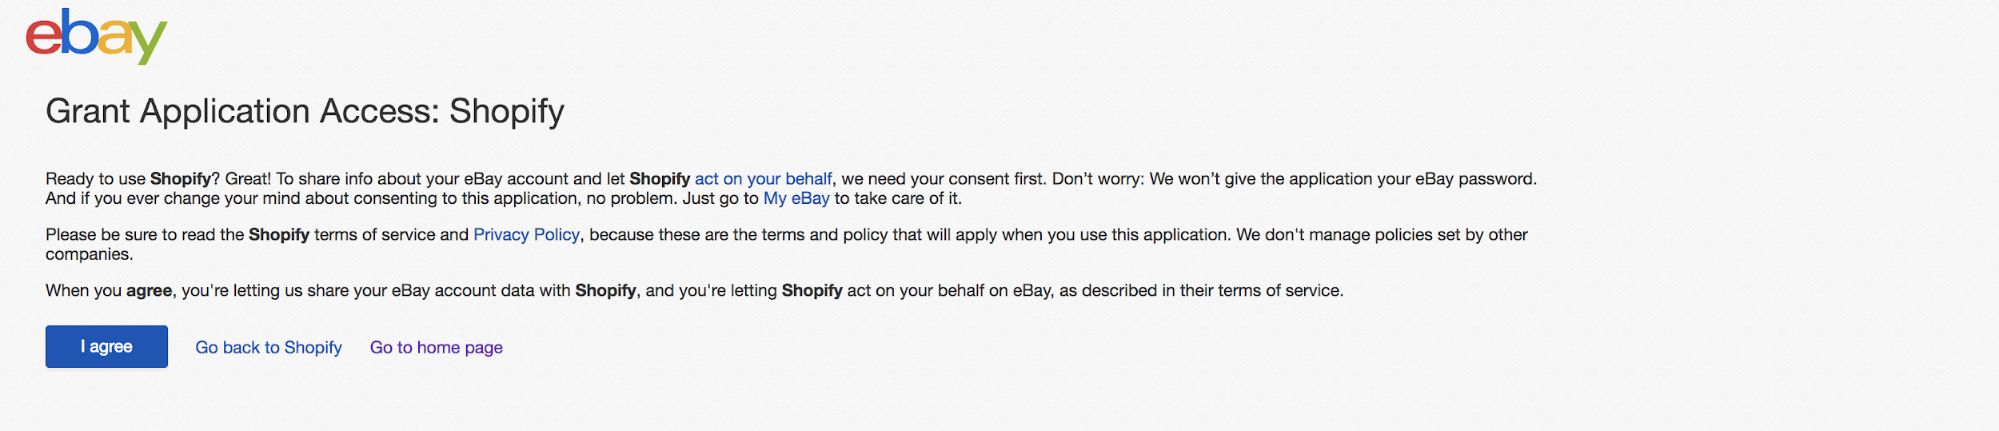 Grant Shopify access to eBay